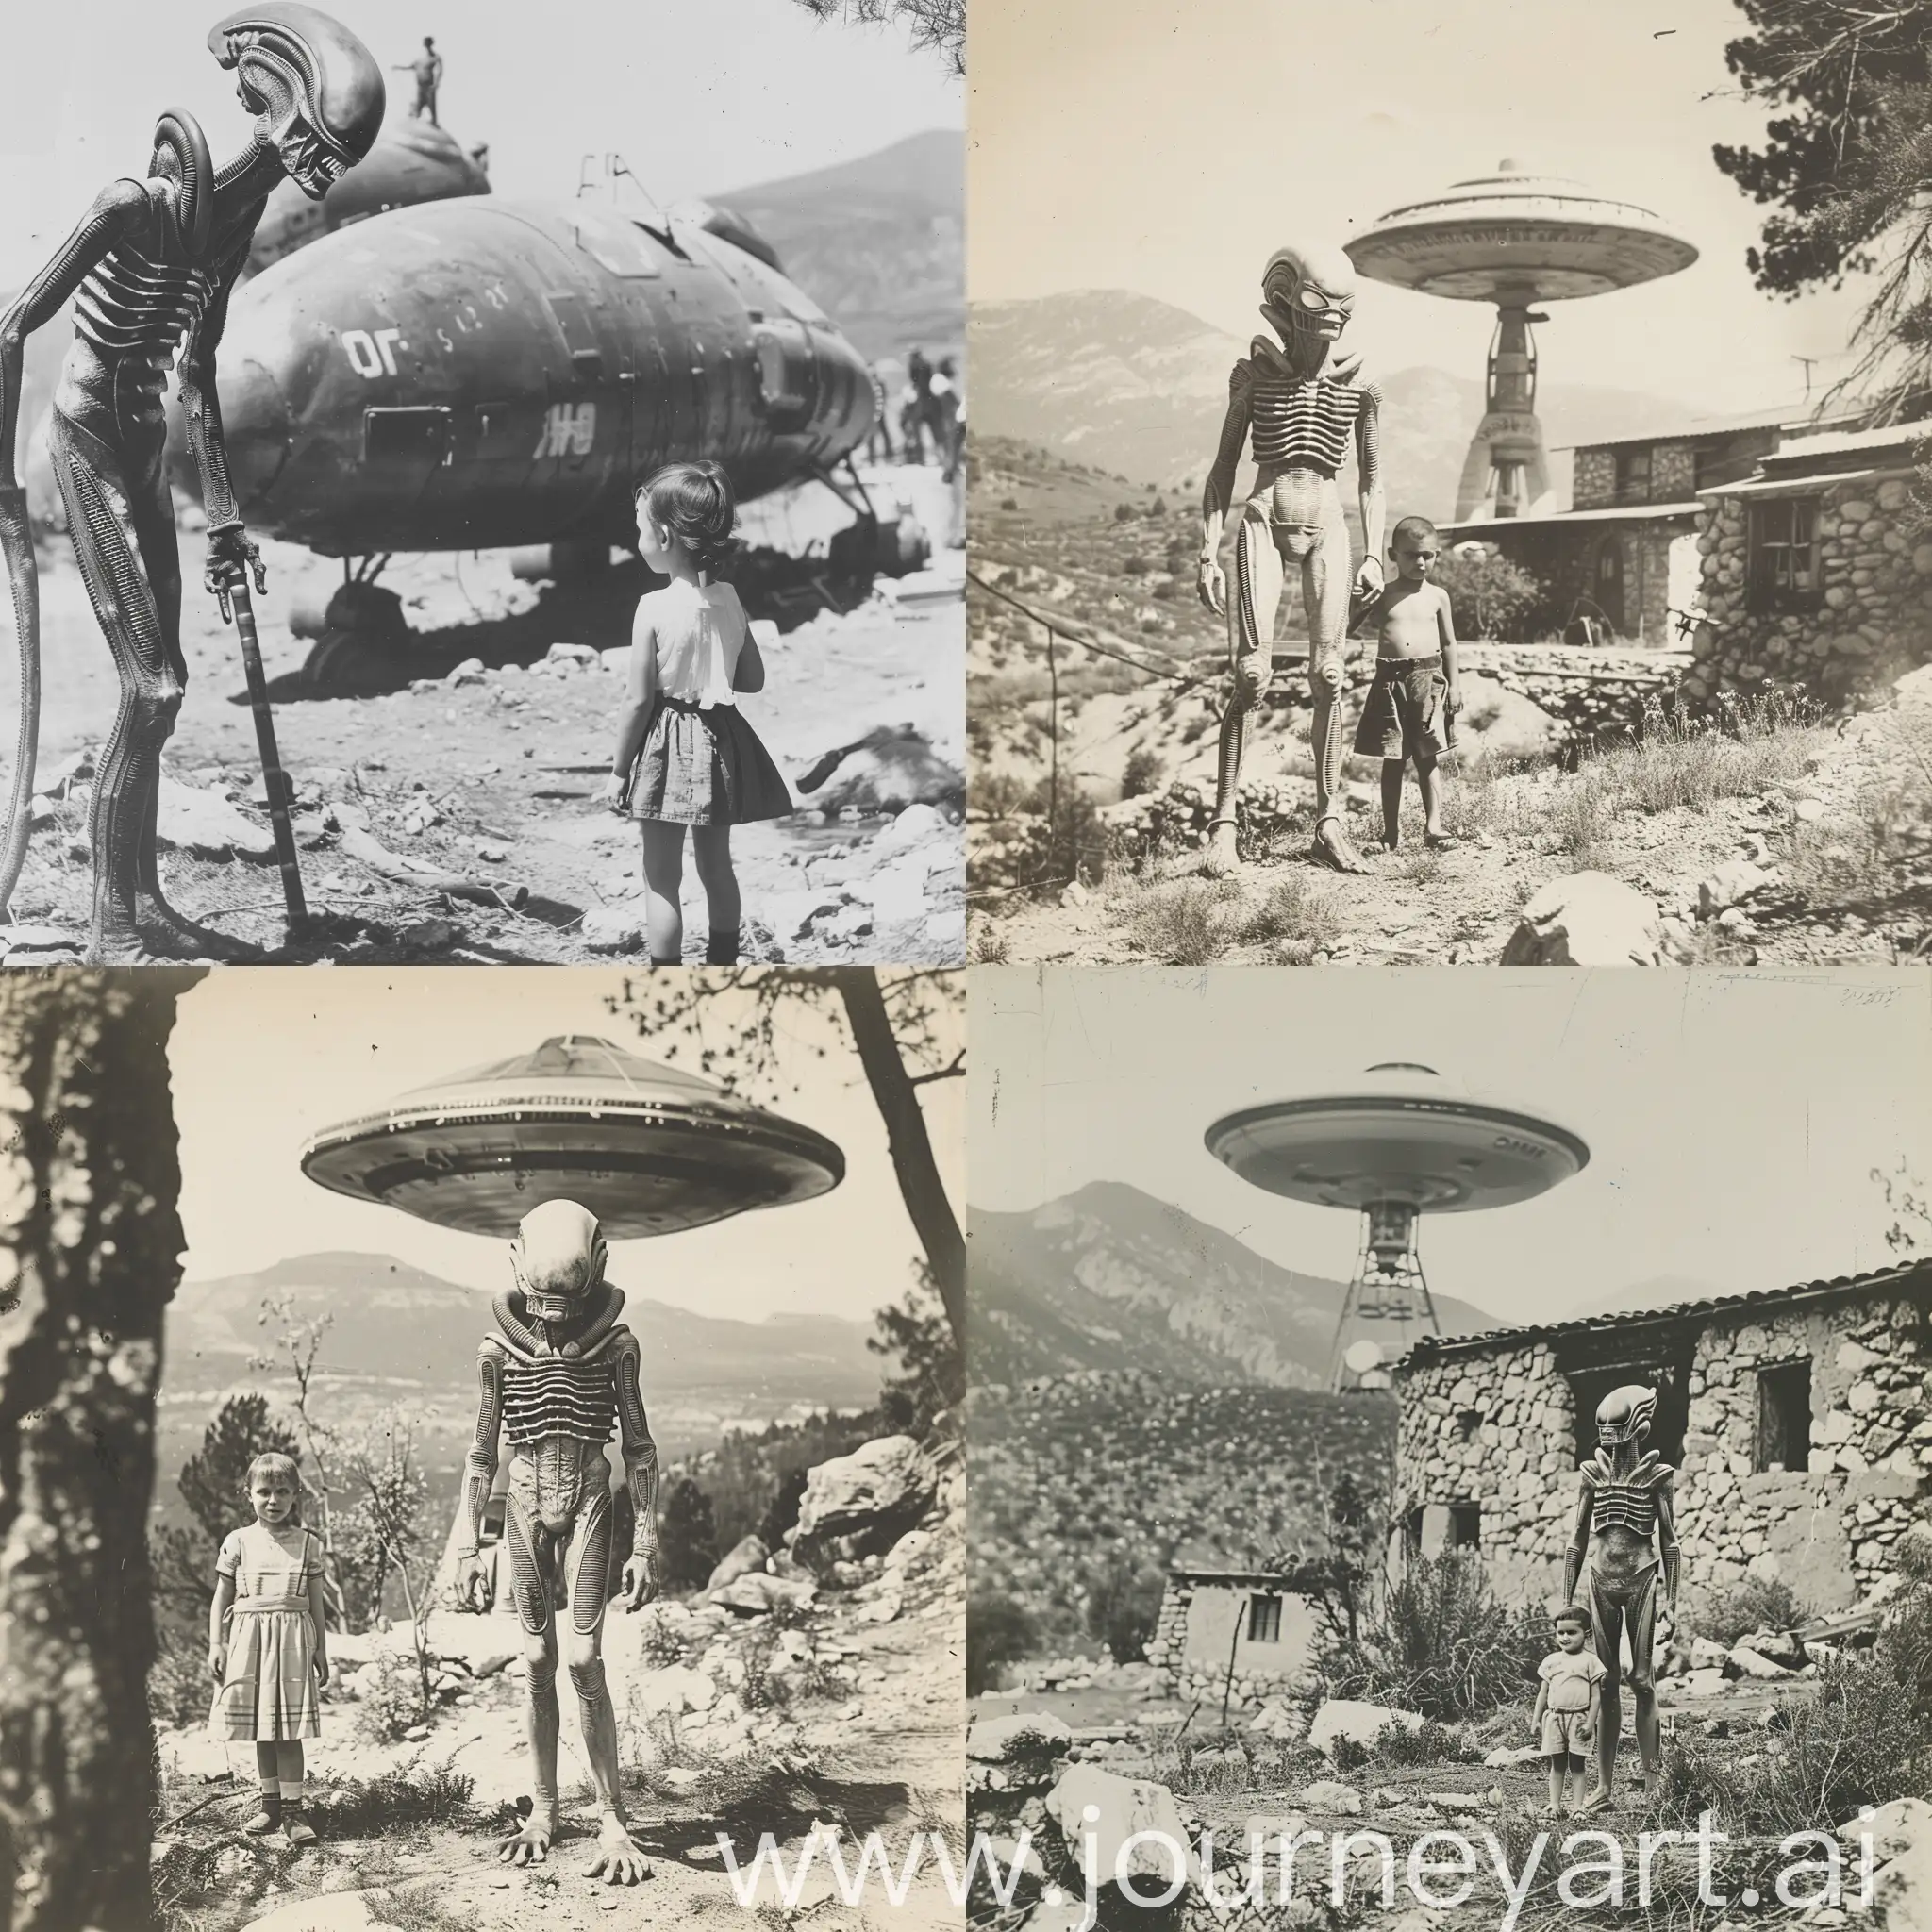 1930-Alien-Encounter-Captivating-Black-and-White-Photo-of-Extraterrestrial-Interaction